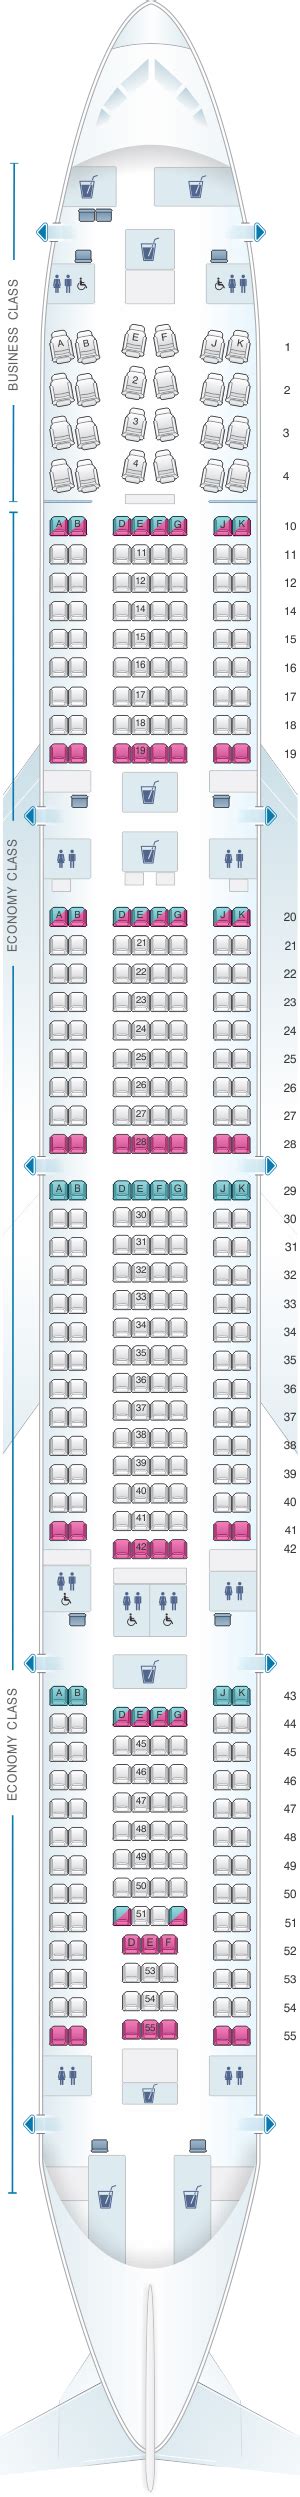 46 Seating Plan For Qatar Airbus A380 800